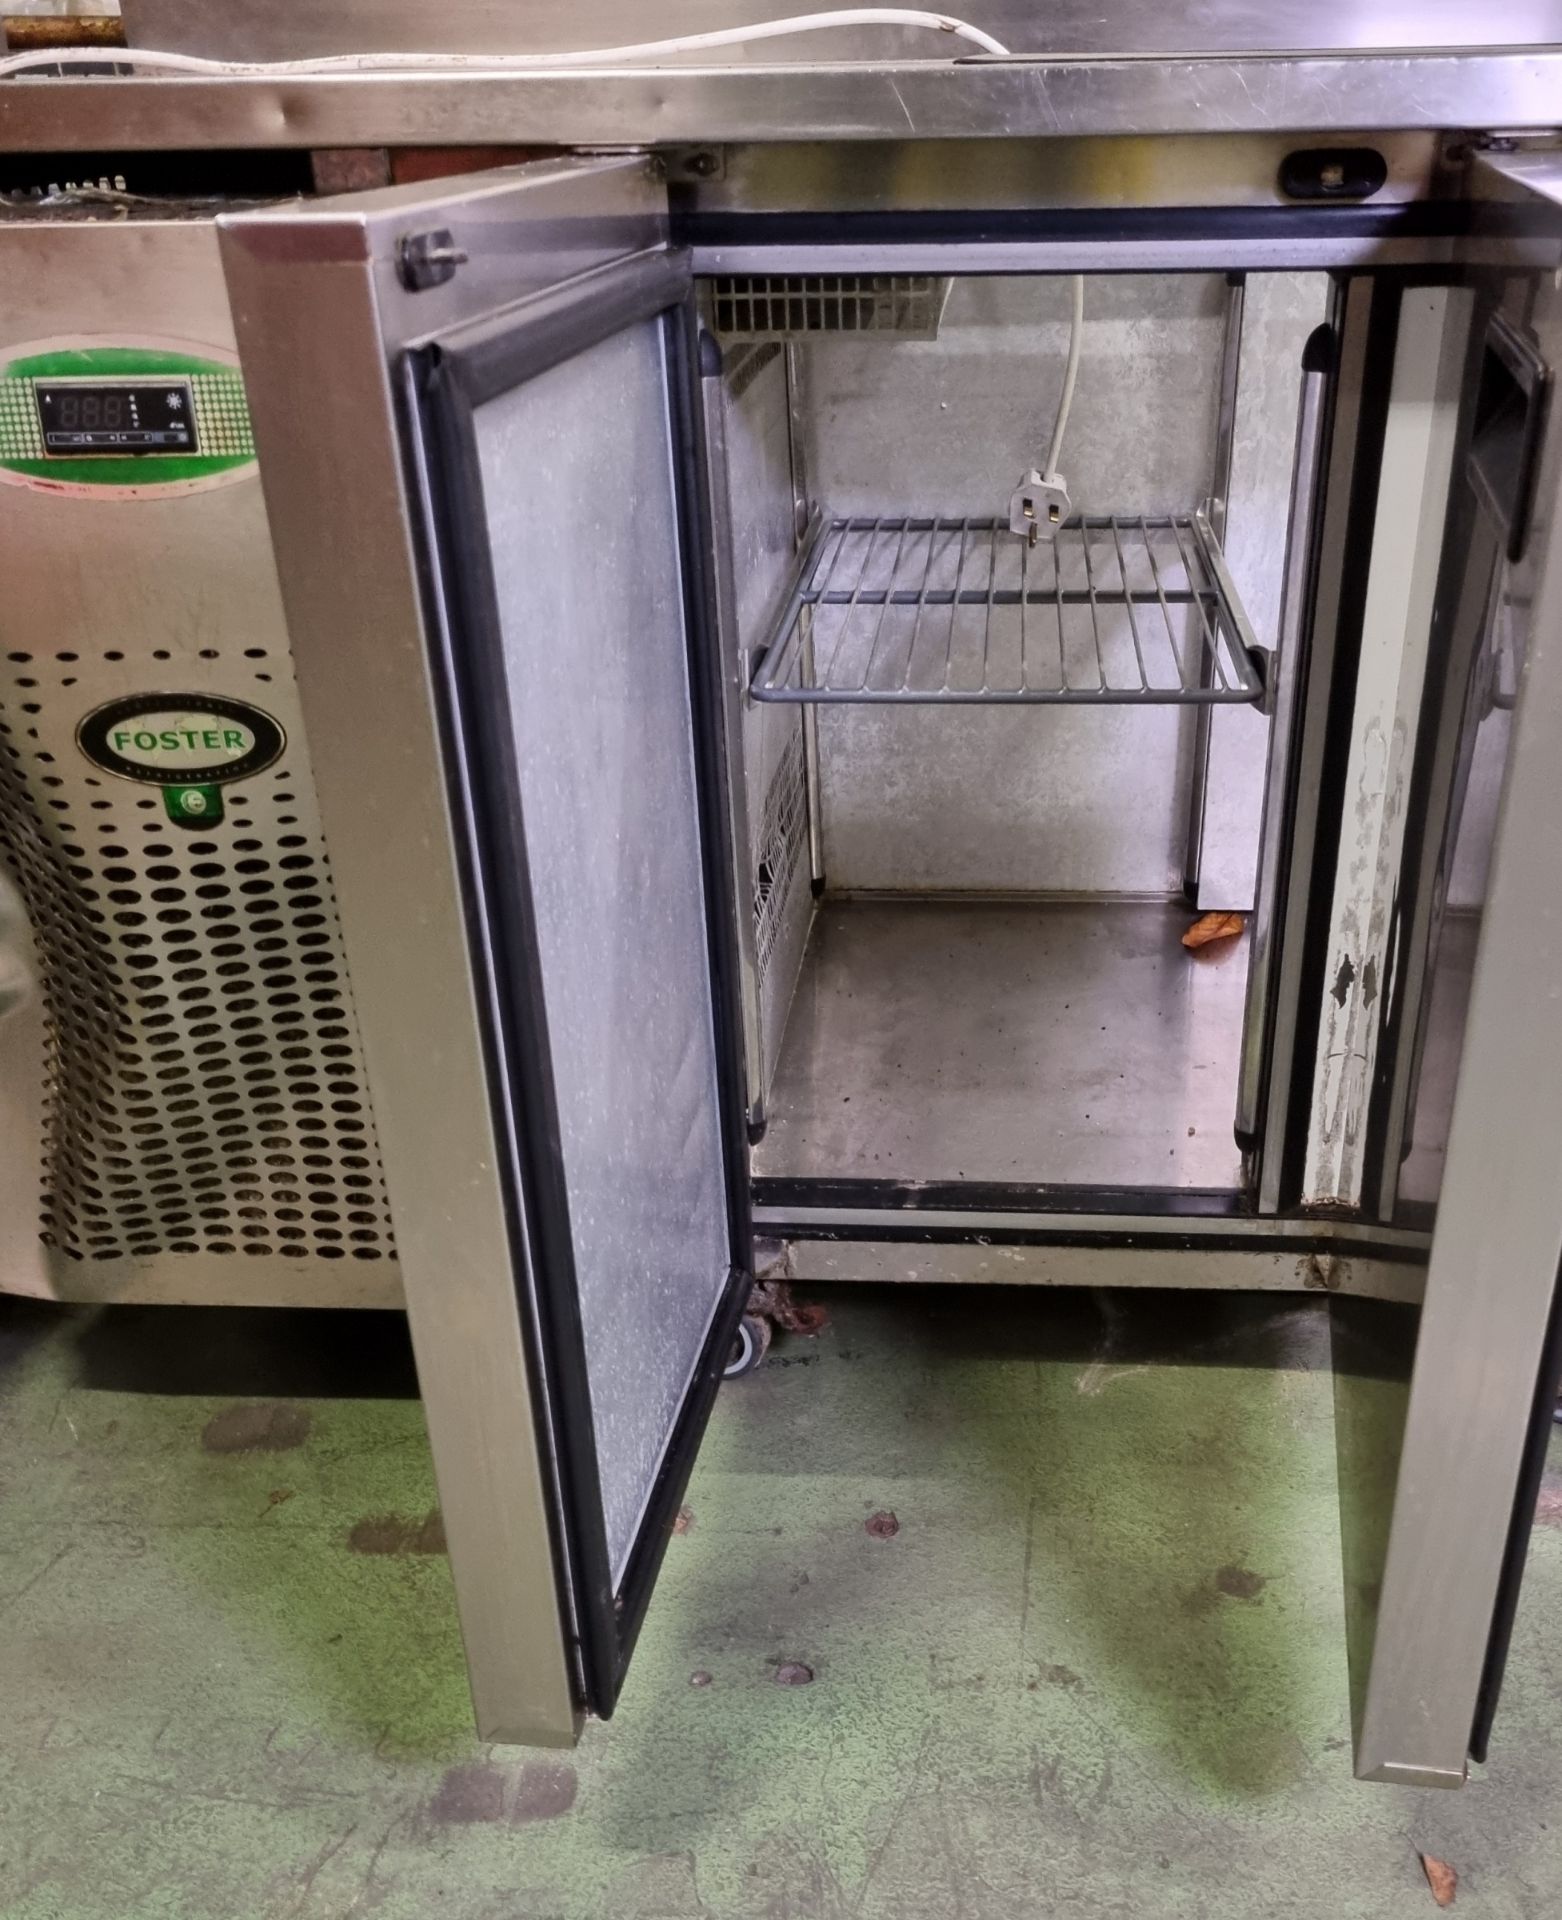 Foster EPRO 1 / 3R 3 door refrigerated prep counter - W 1870 x D 700 x H 960mm - DAMAGED PANEL - Image 5 of 7